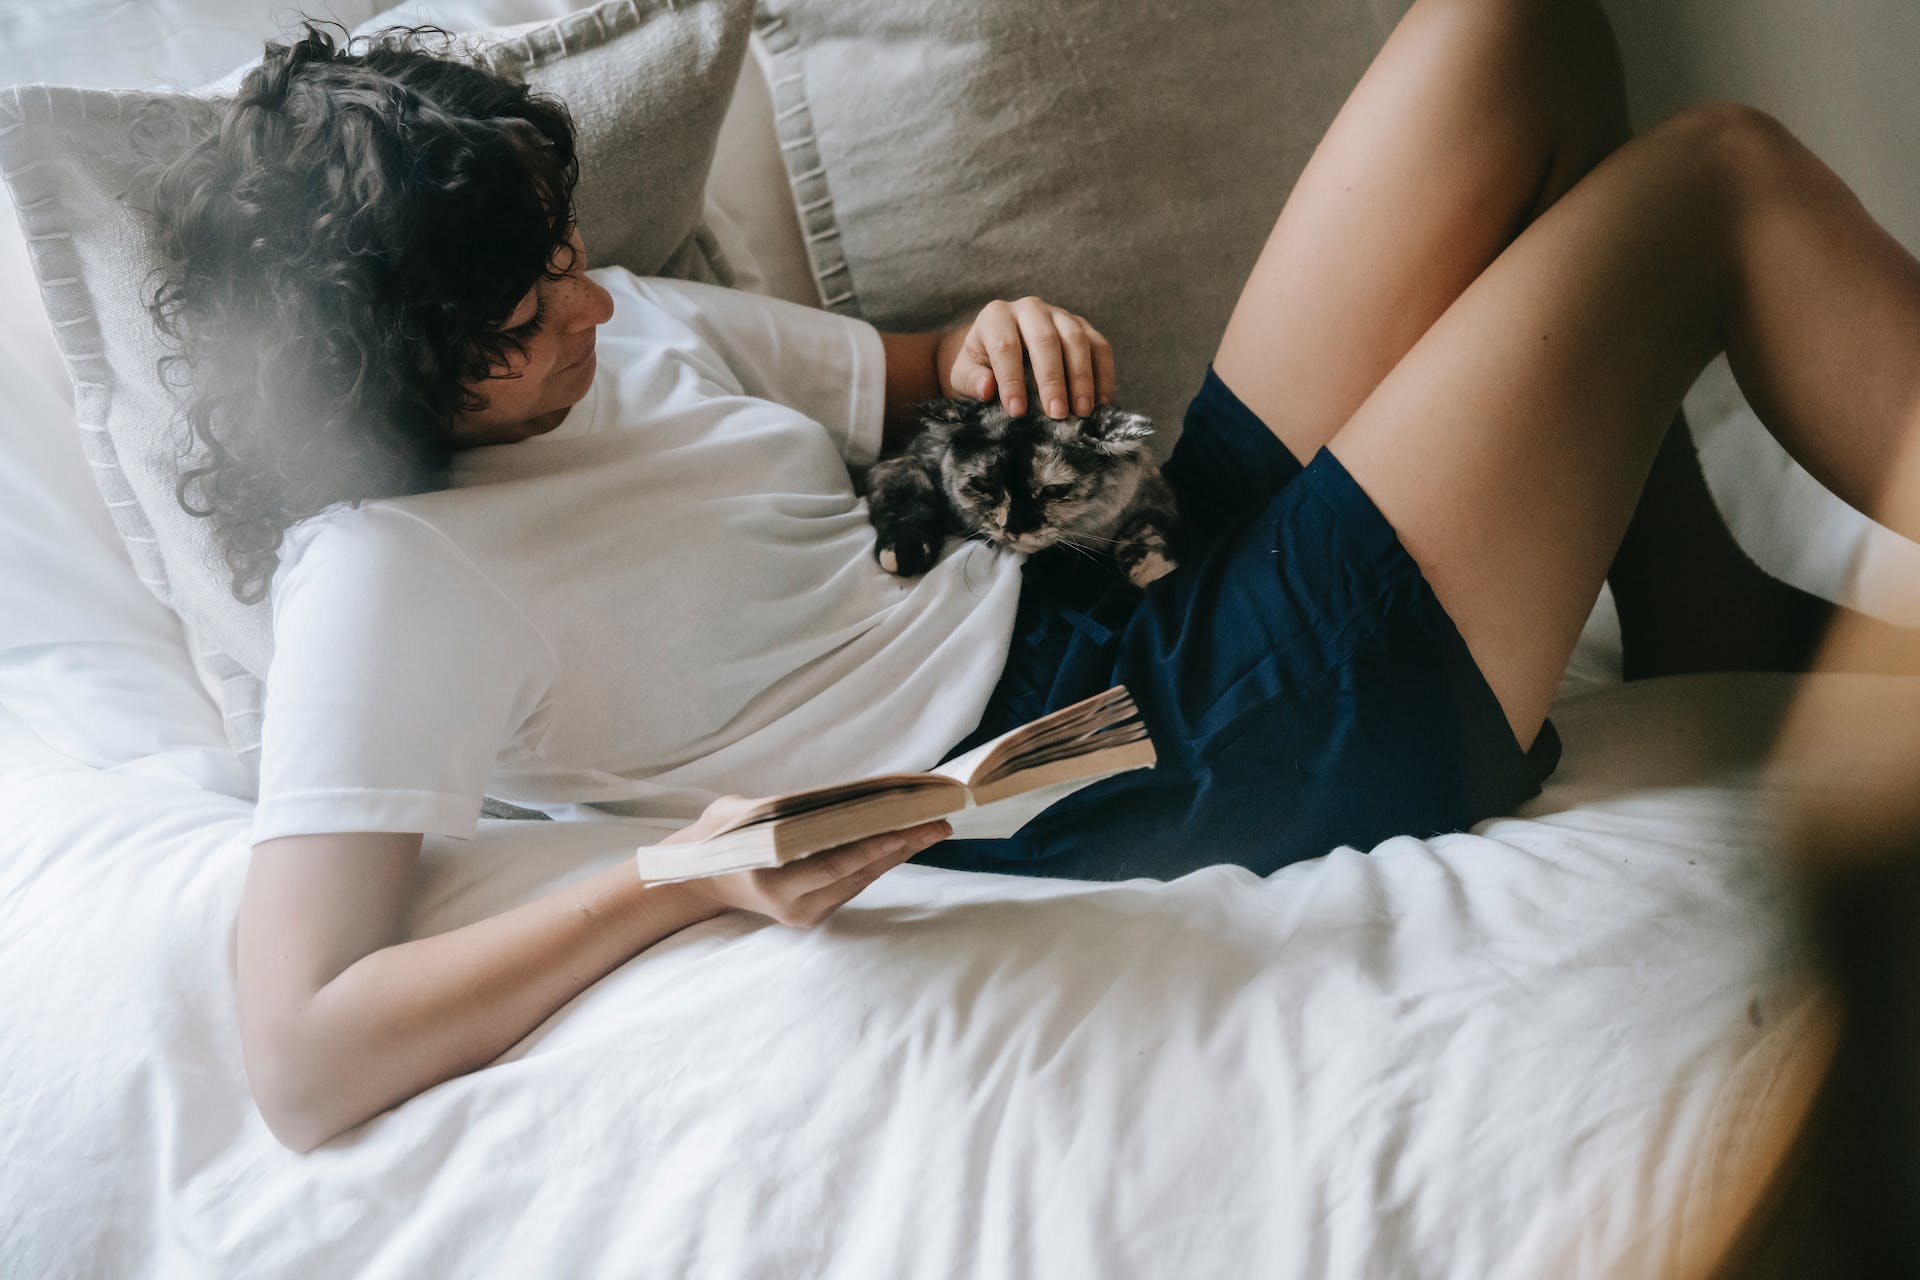 A woman cuddling with a cat in bed while reading a book